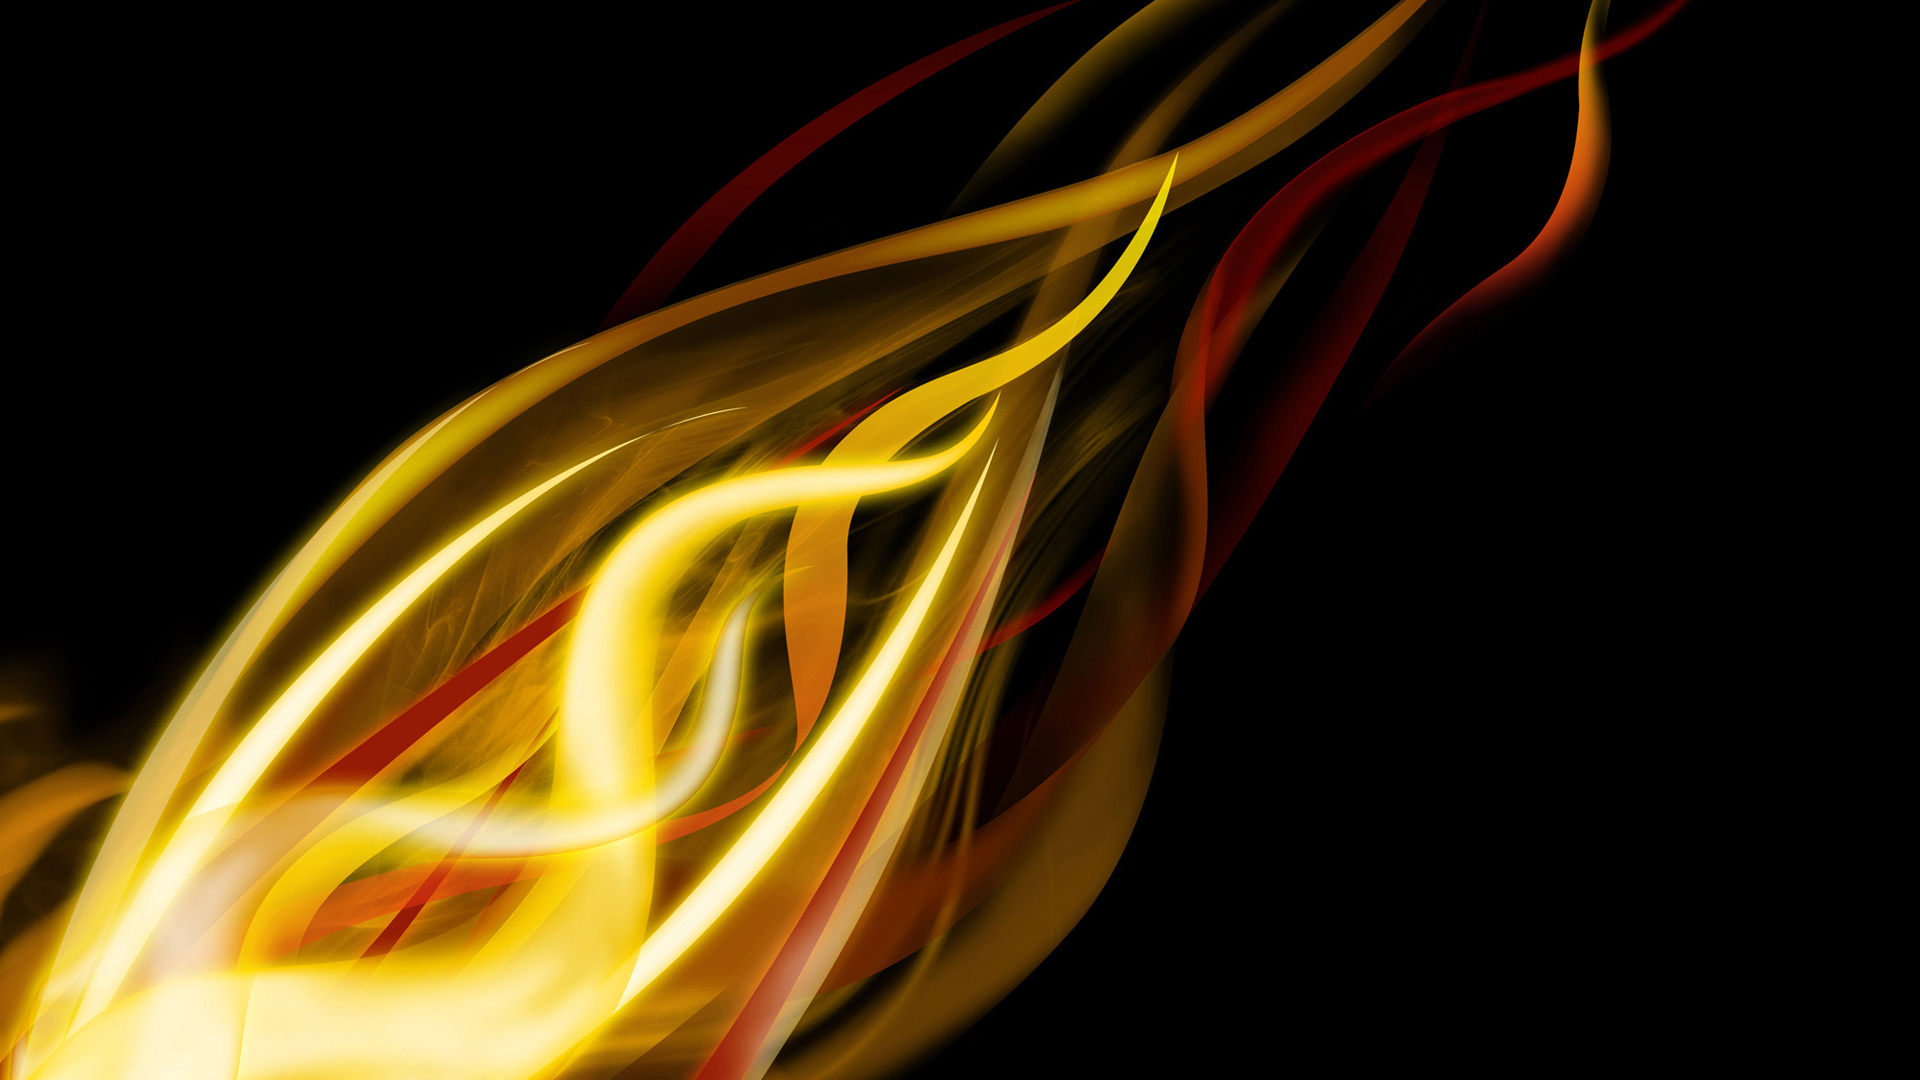 General 1920x1080 abstract black background shapes yellow red orange